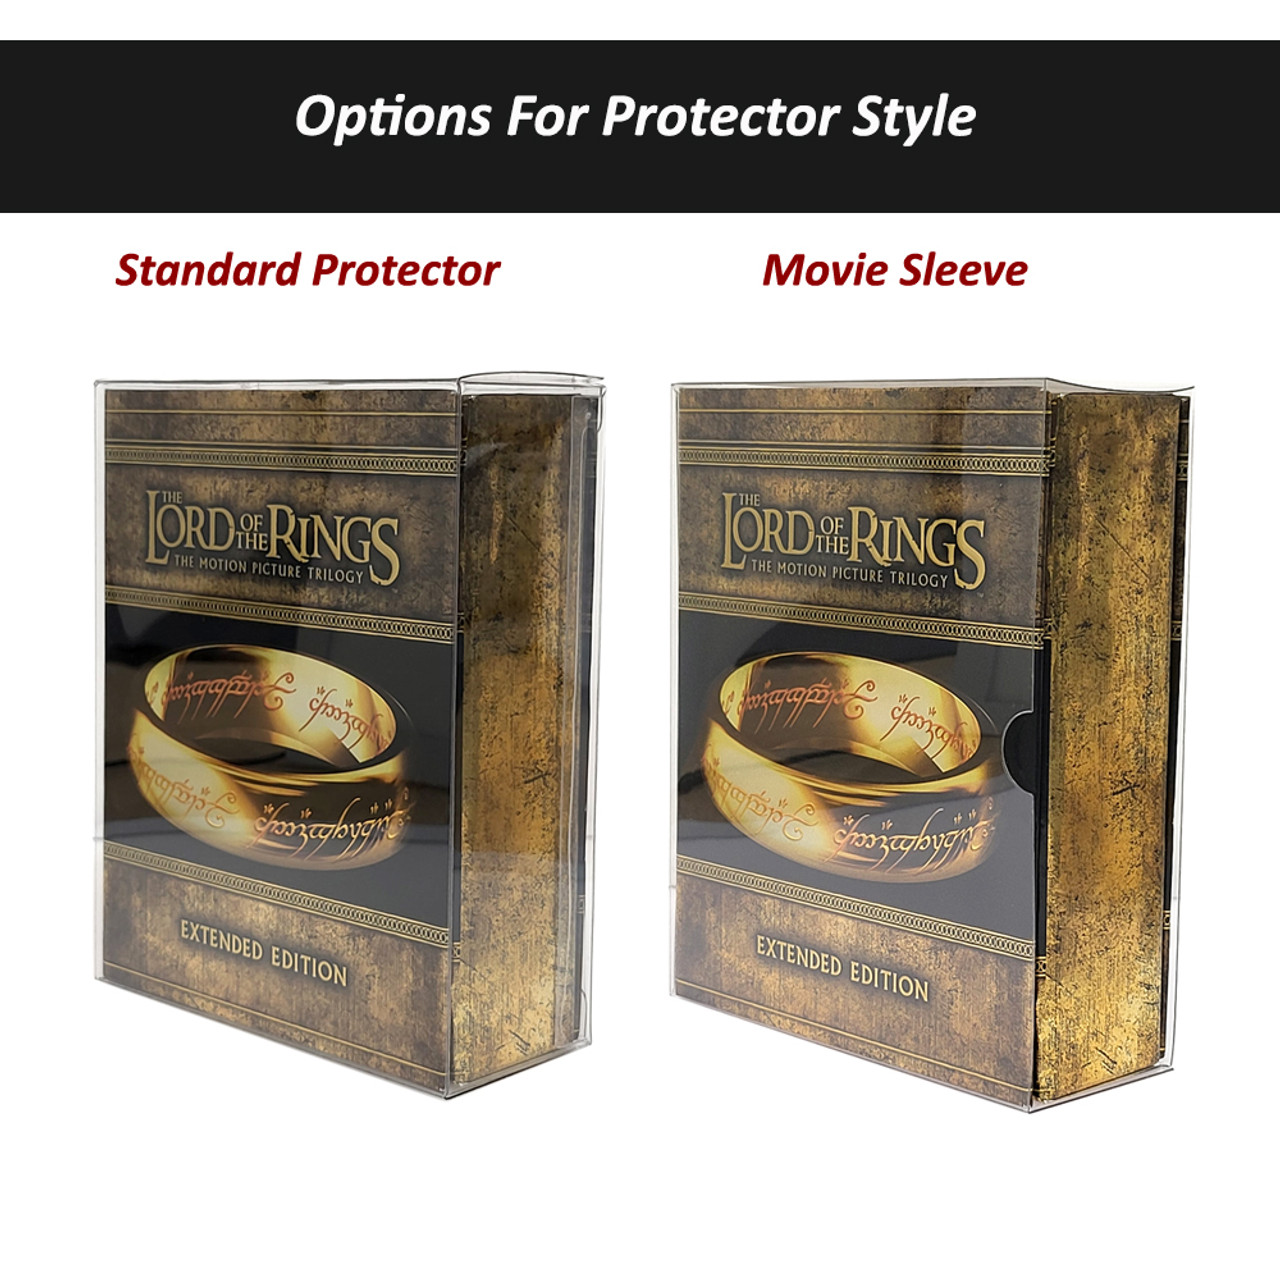 Protector For Blood money. Arrow Video